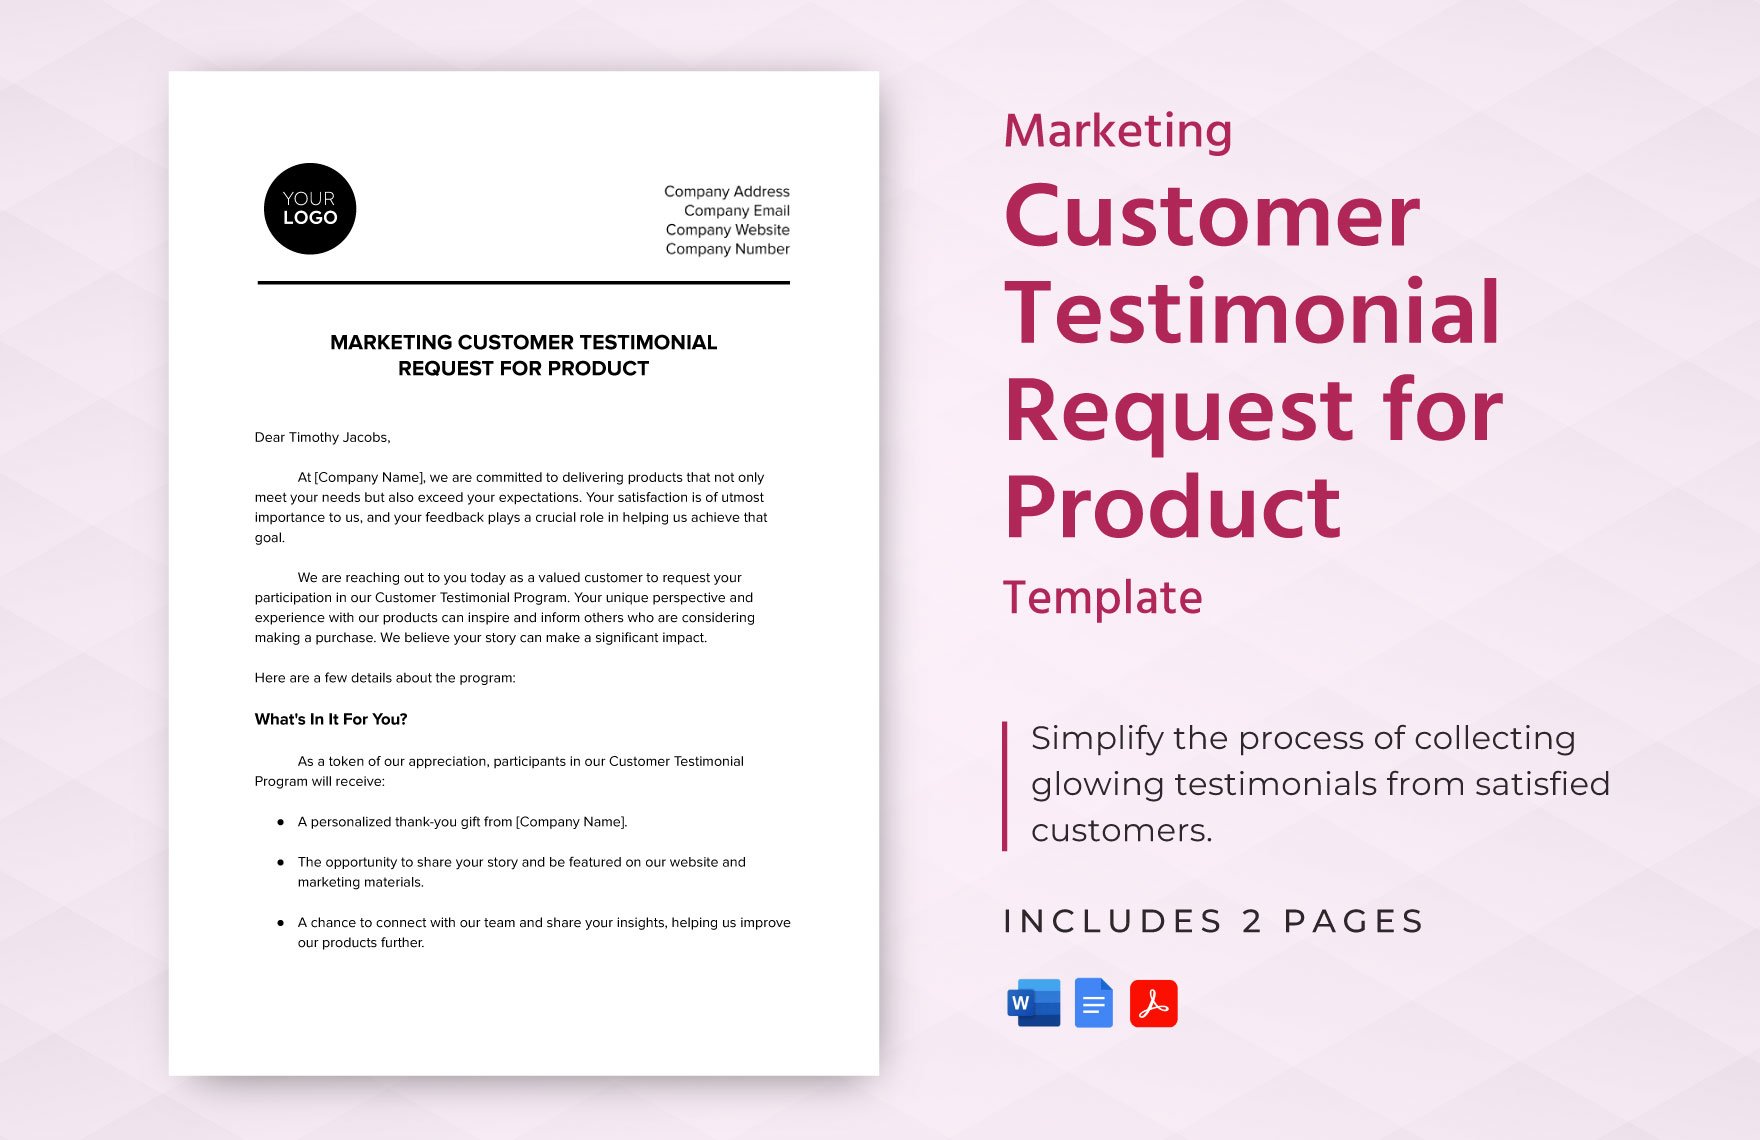 Marketing Customer Testimonial Request for Product Template in Word, Google Docs, PDF